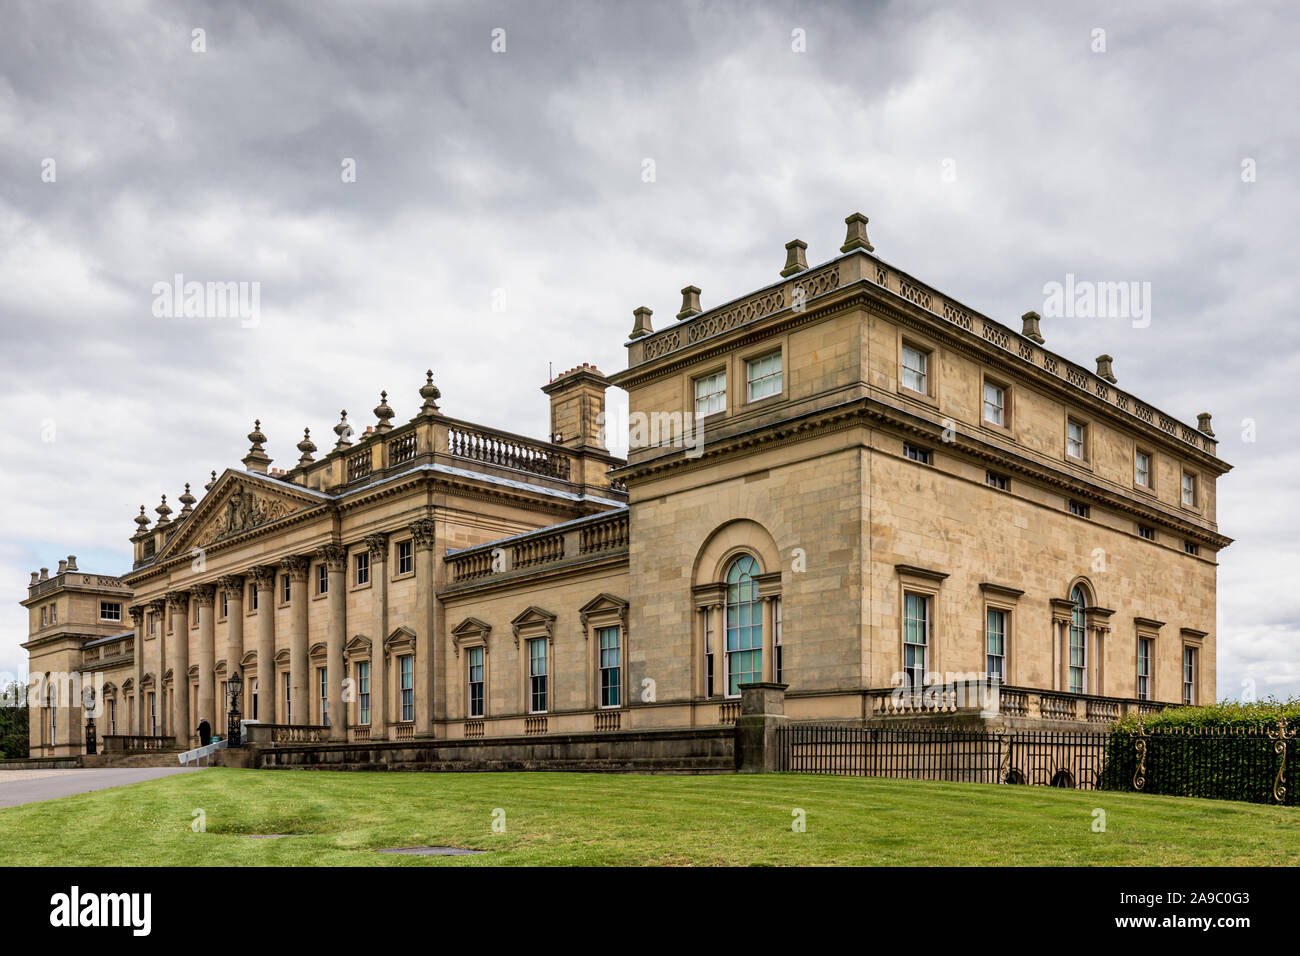 The Historic Harewood House and gardens near Leeds, West Yorkshire, England.  Designed by architects John Carr and Robert Adam. Stock Photo